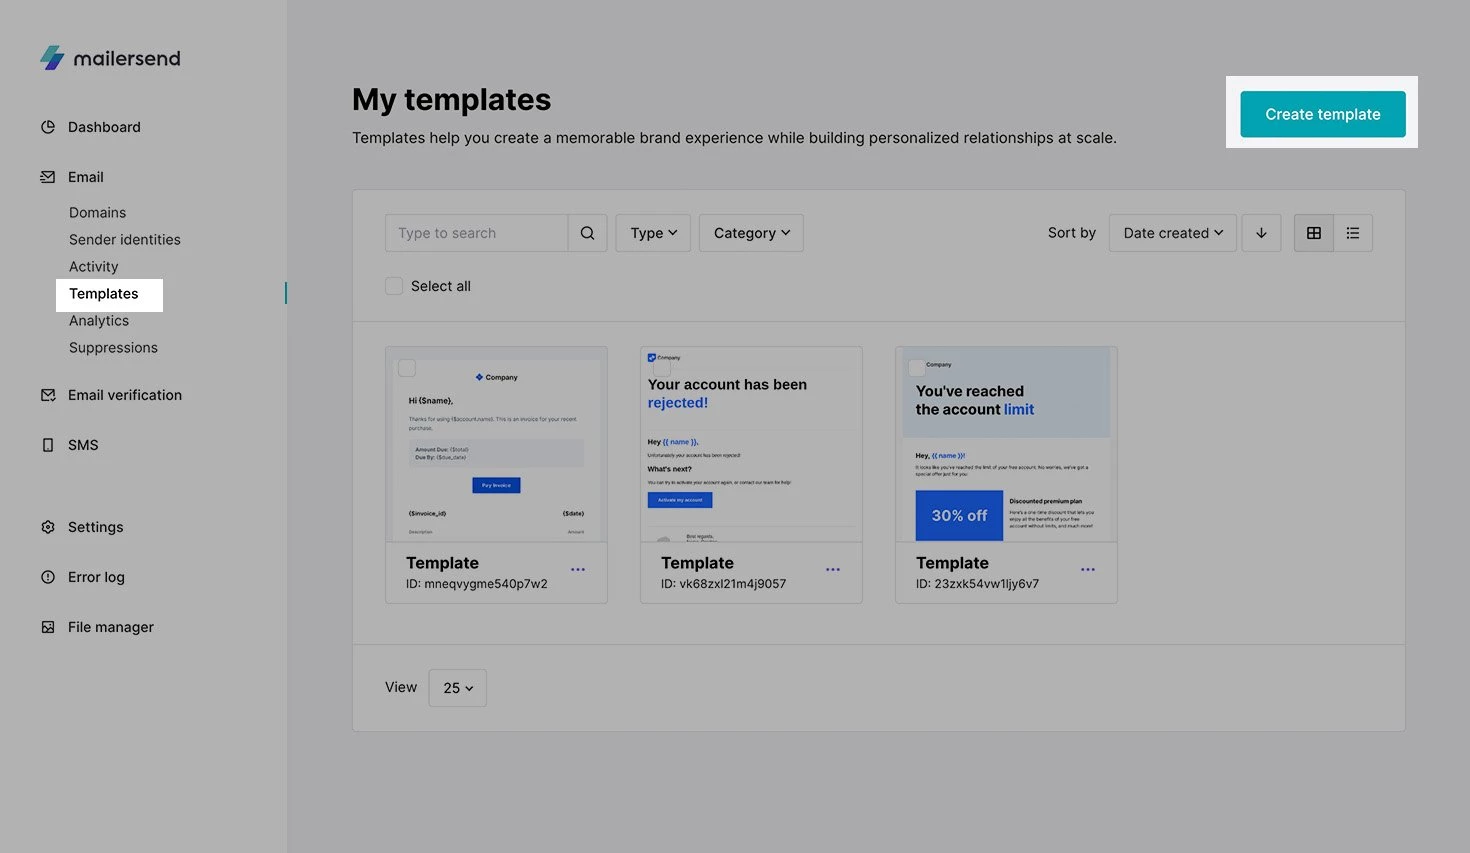 Templates page with button to create a template highlighted.